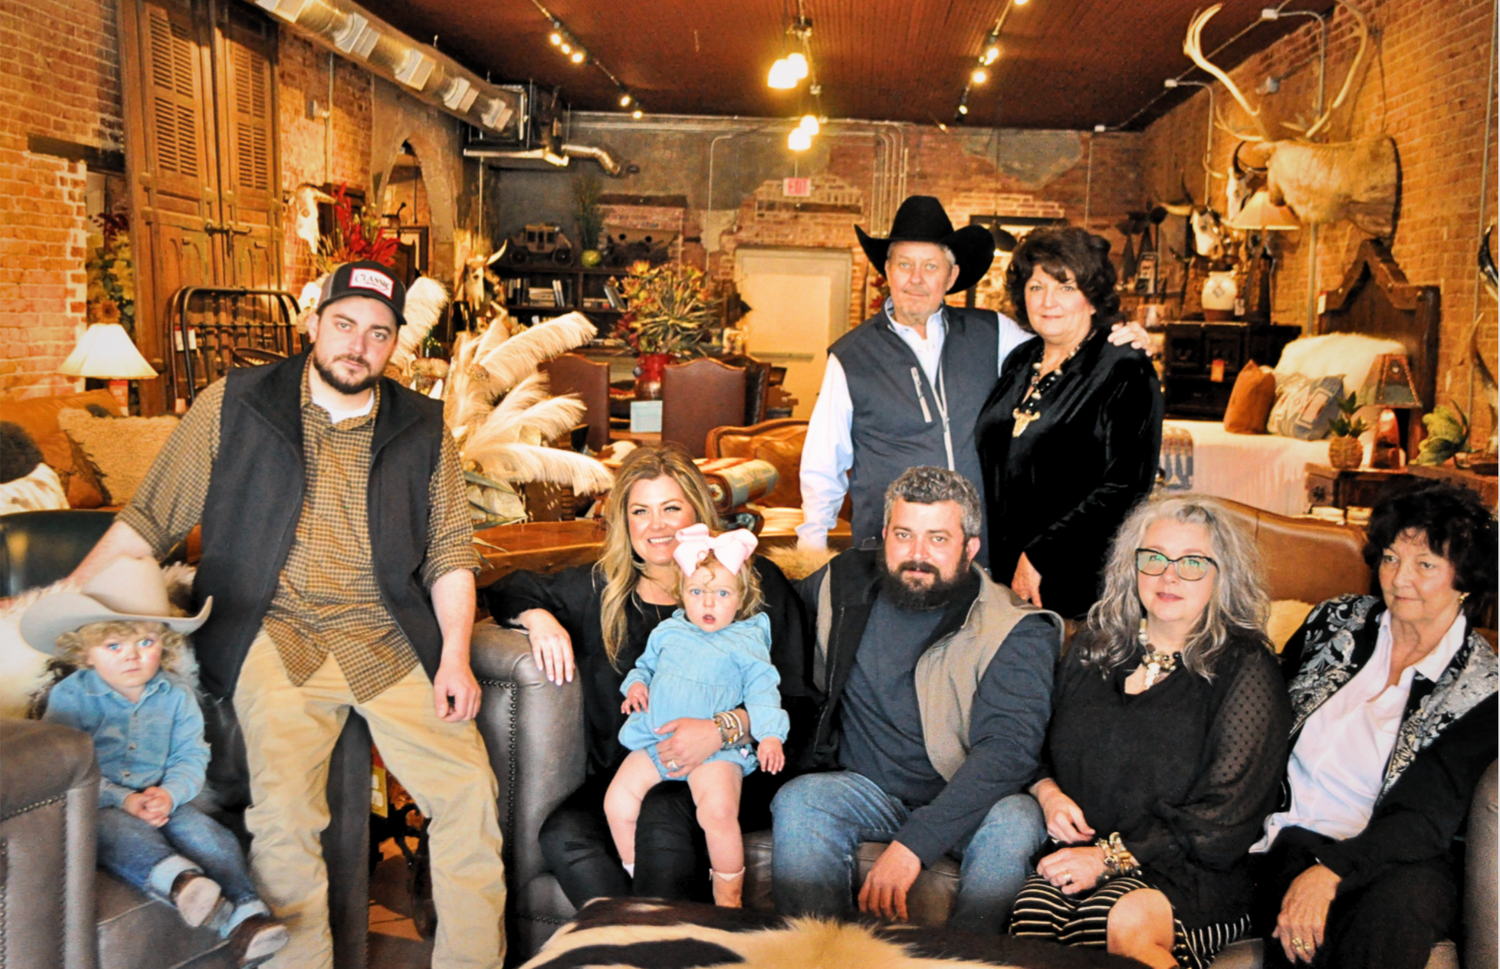 Into the West is a Fort Worth based, family-owned Western retailer specializing in luxury, handmade and customizable furniture and decor designed to make your home feel welcoming and warm.